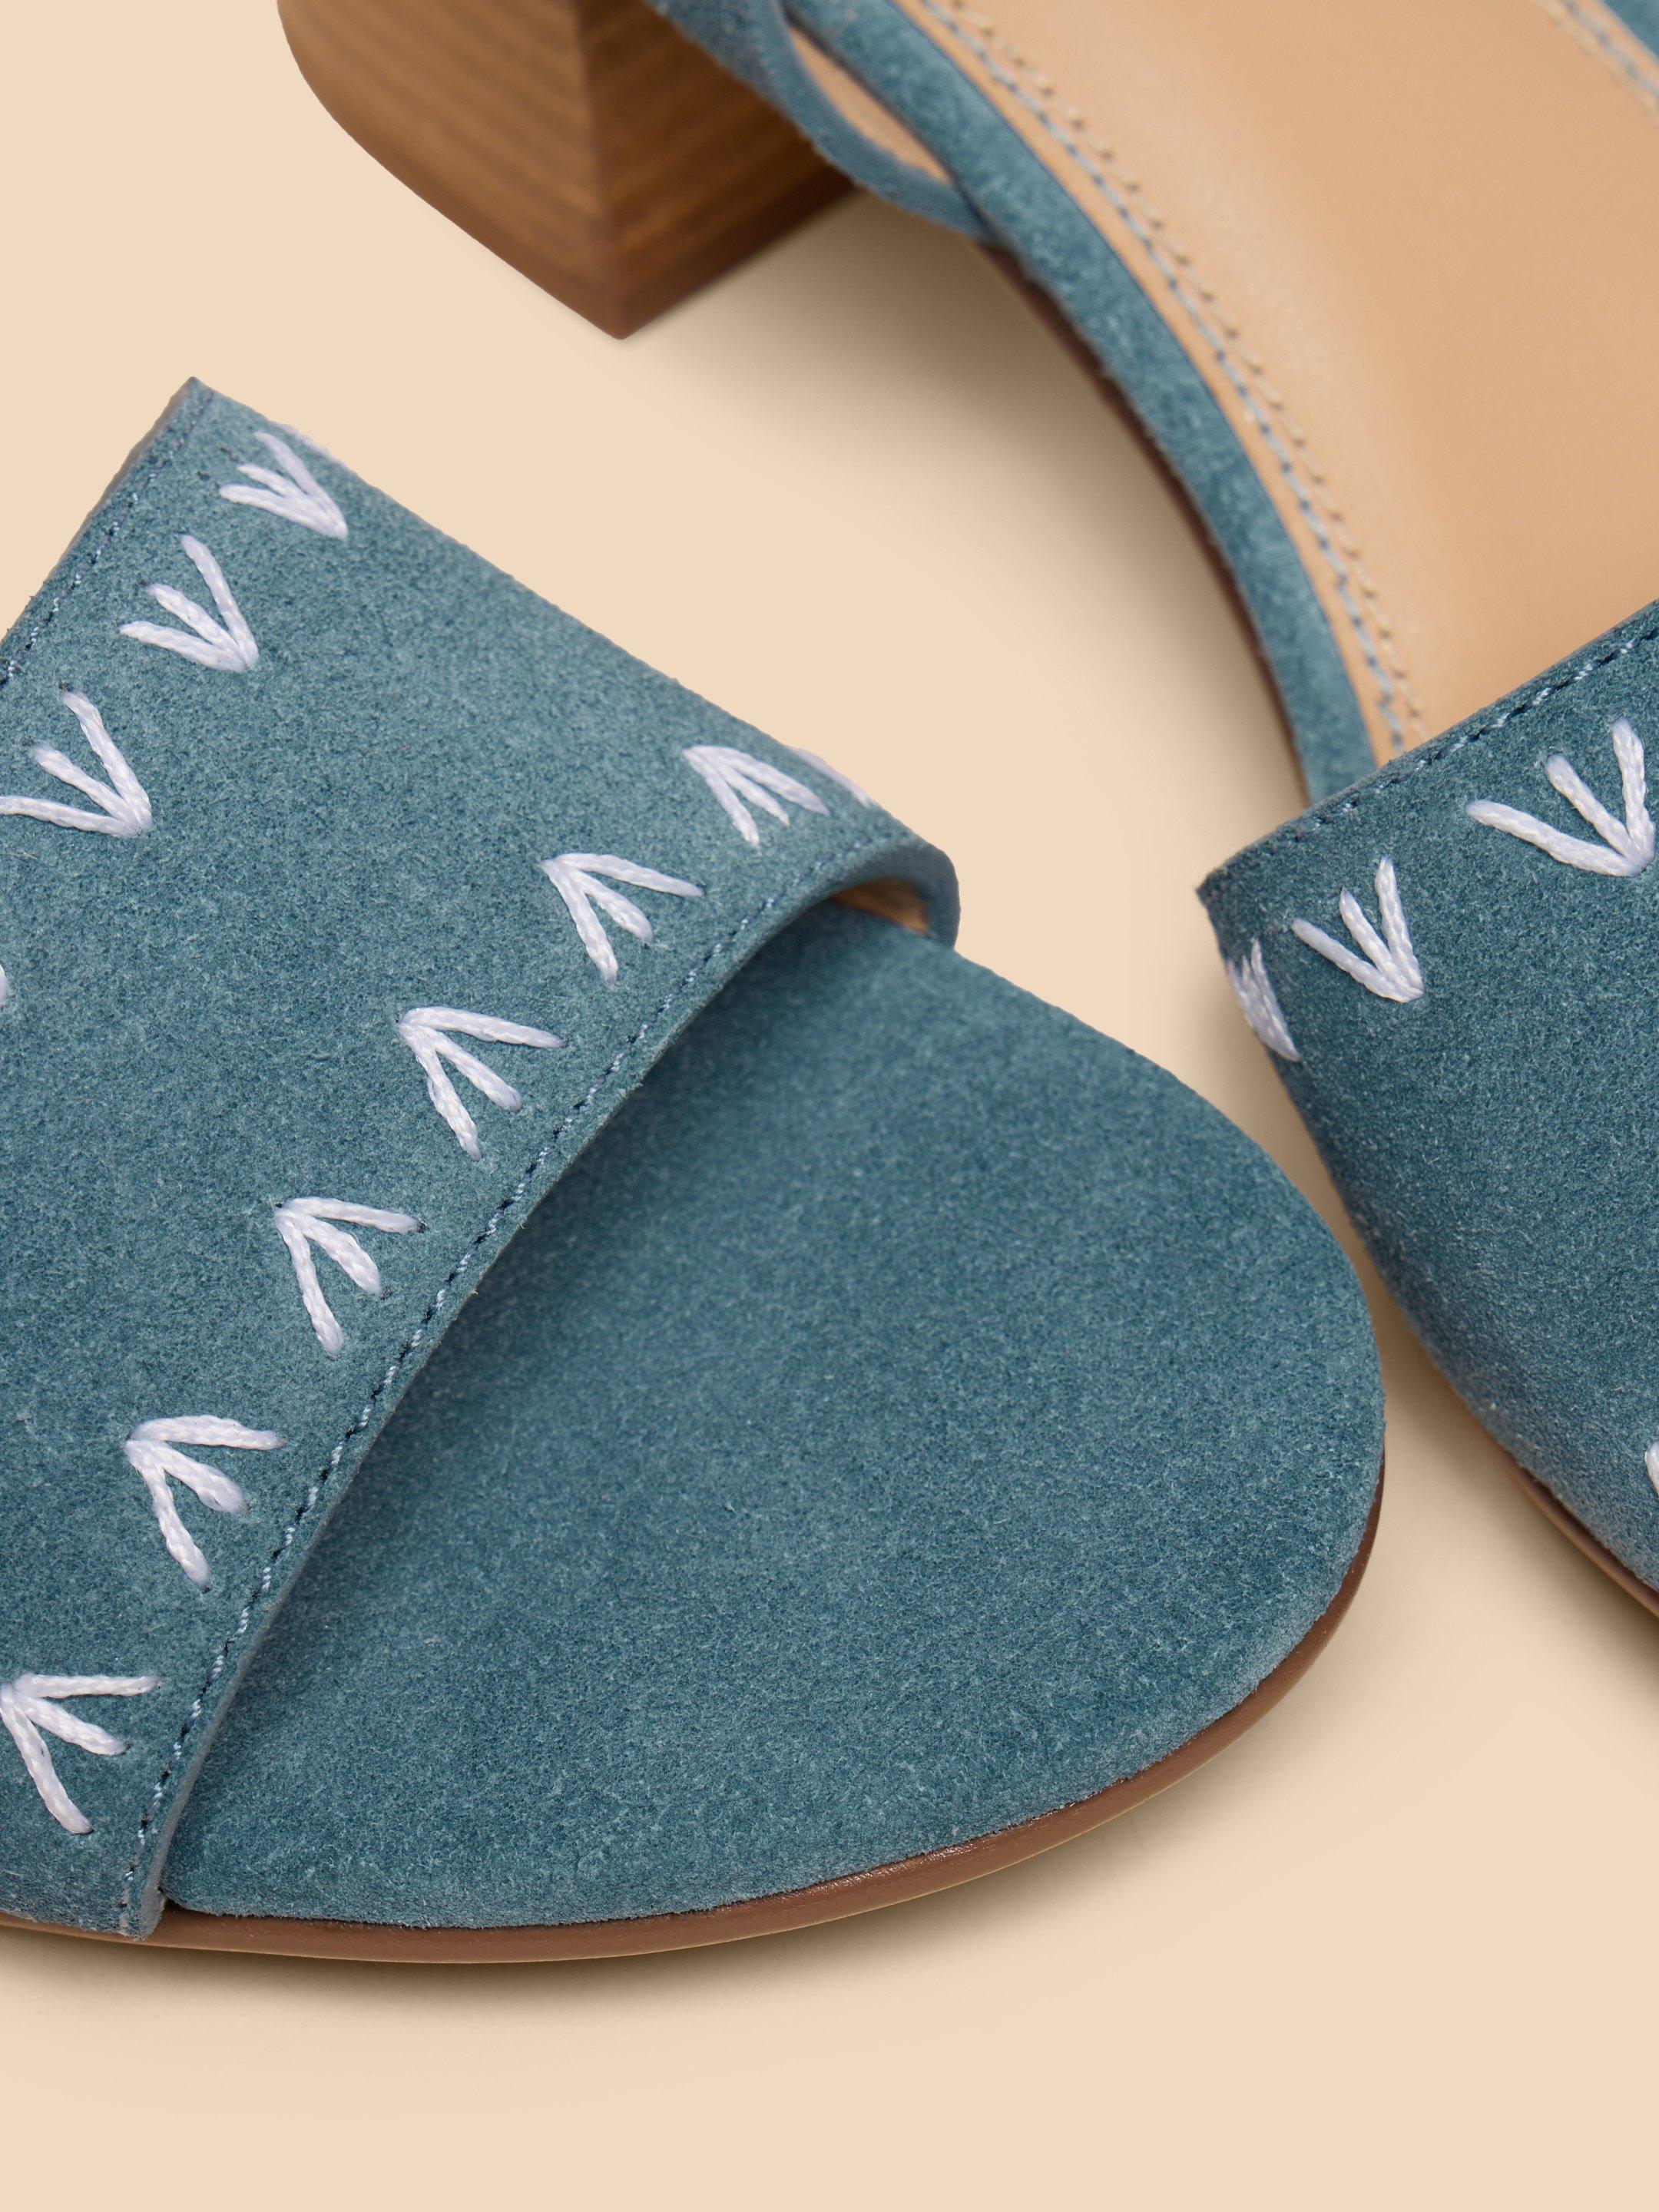 Ivy Suede Heel Sandal in CHAMB BLUE - FLAT DETAIL